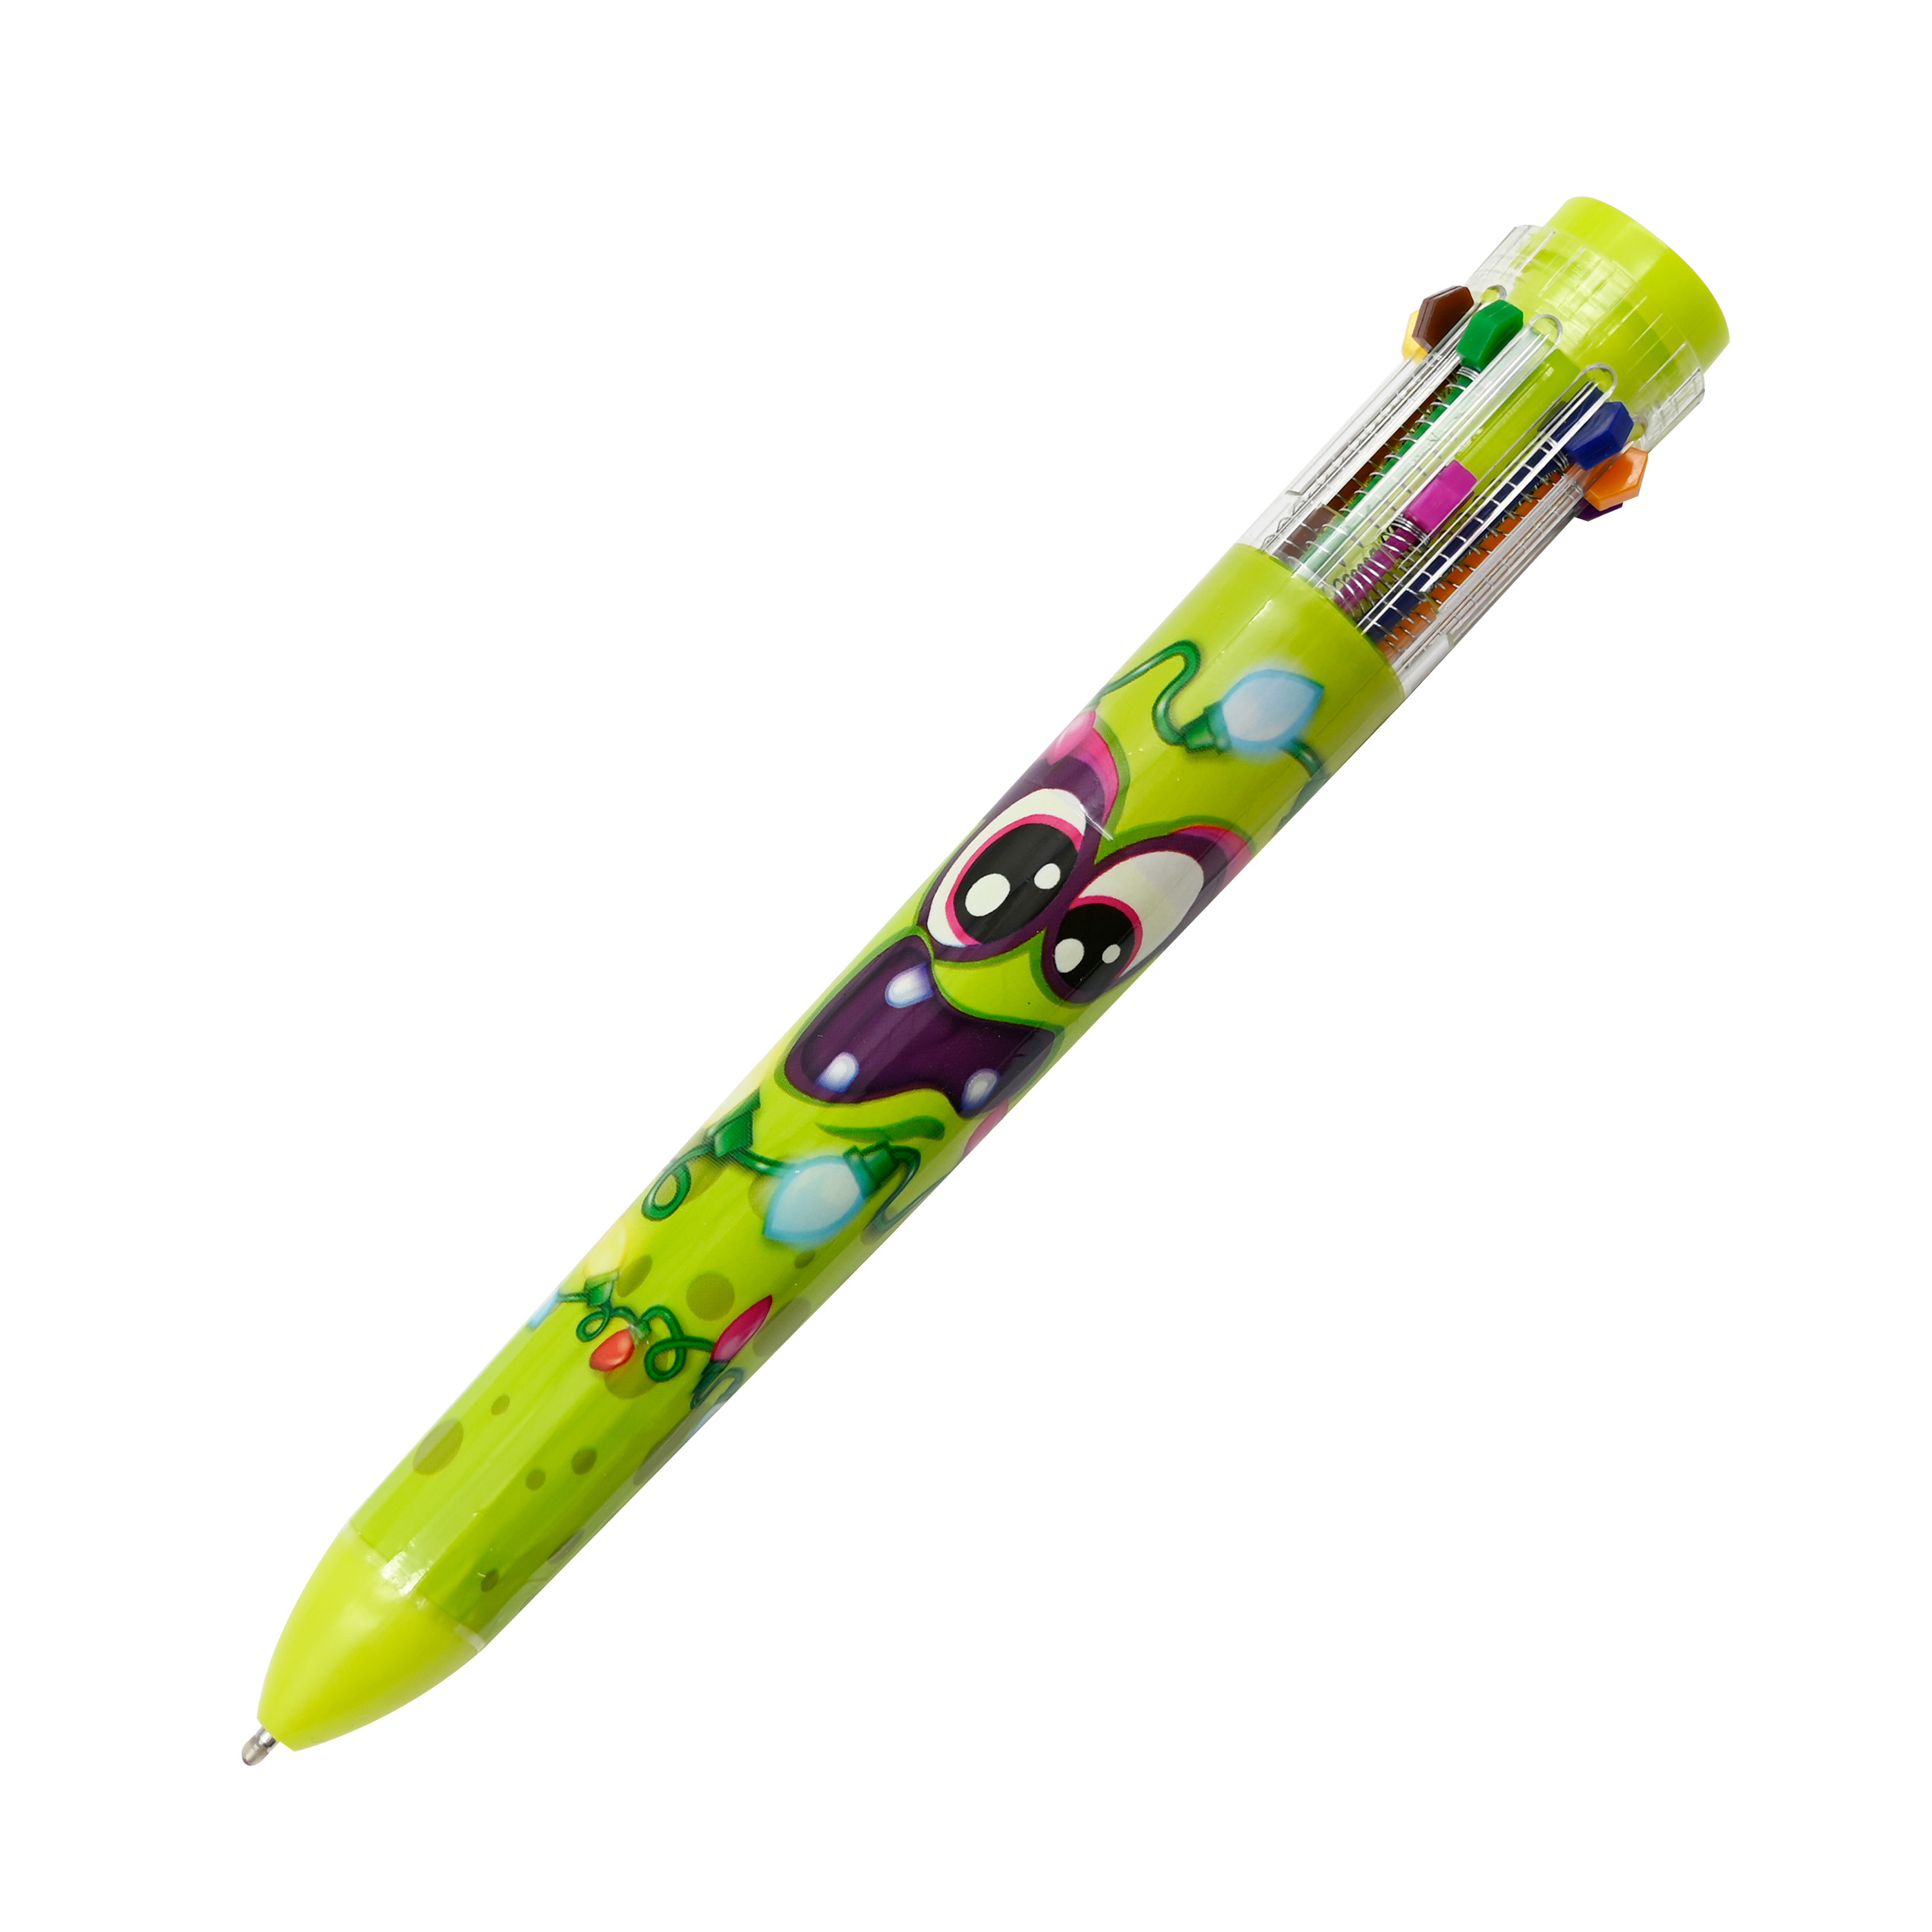 Scentos Christmas Scented Ballpoint Green Rainbow Pen with 10 Assorted  Colors - Ages 3+, Pens